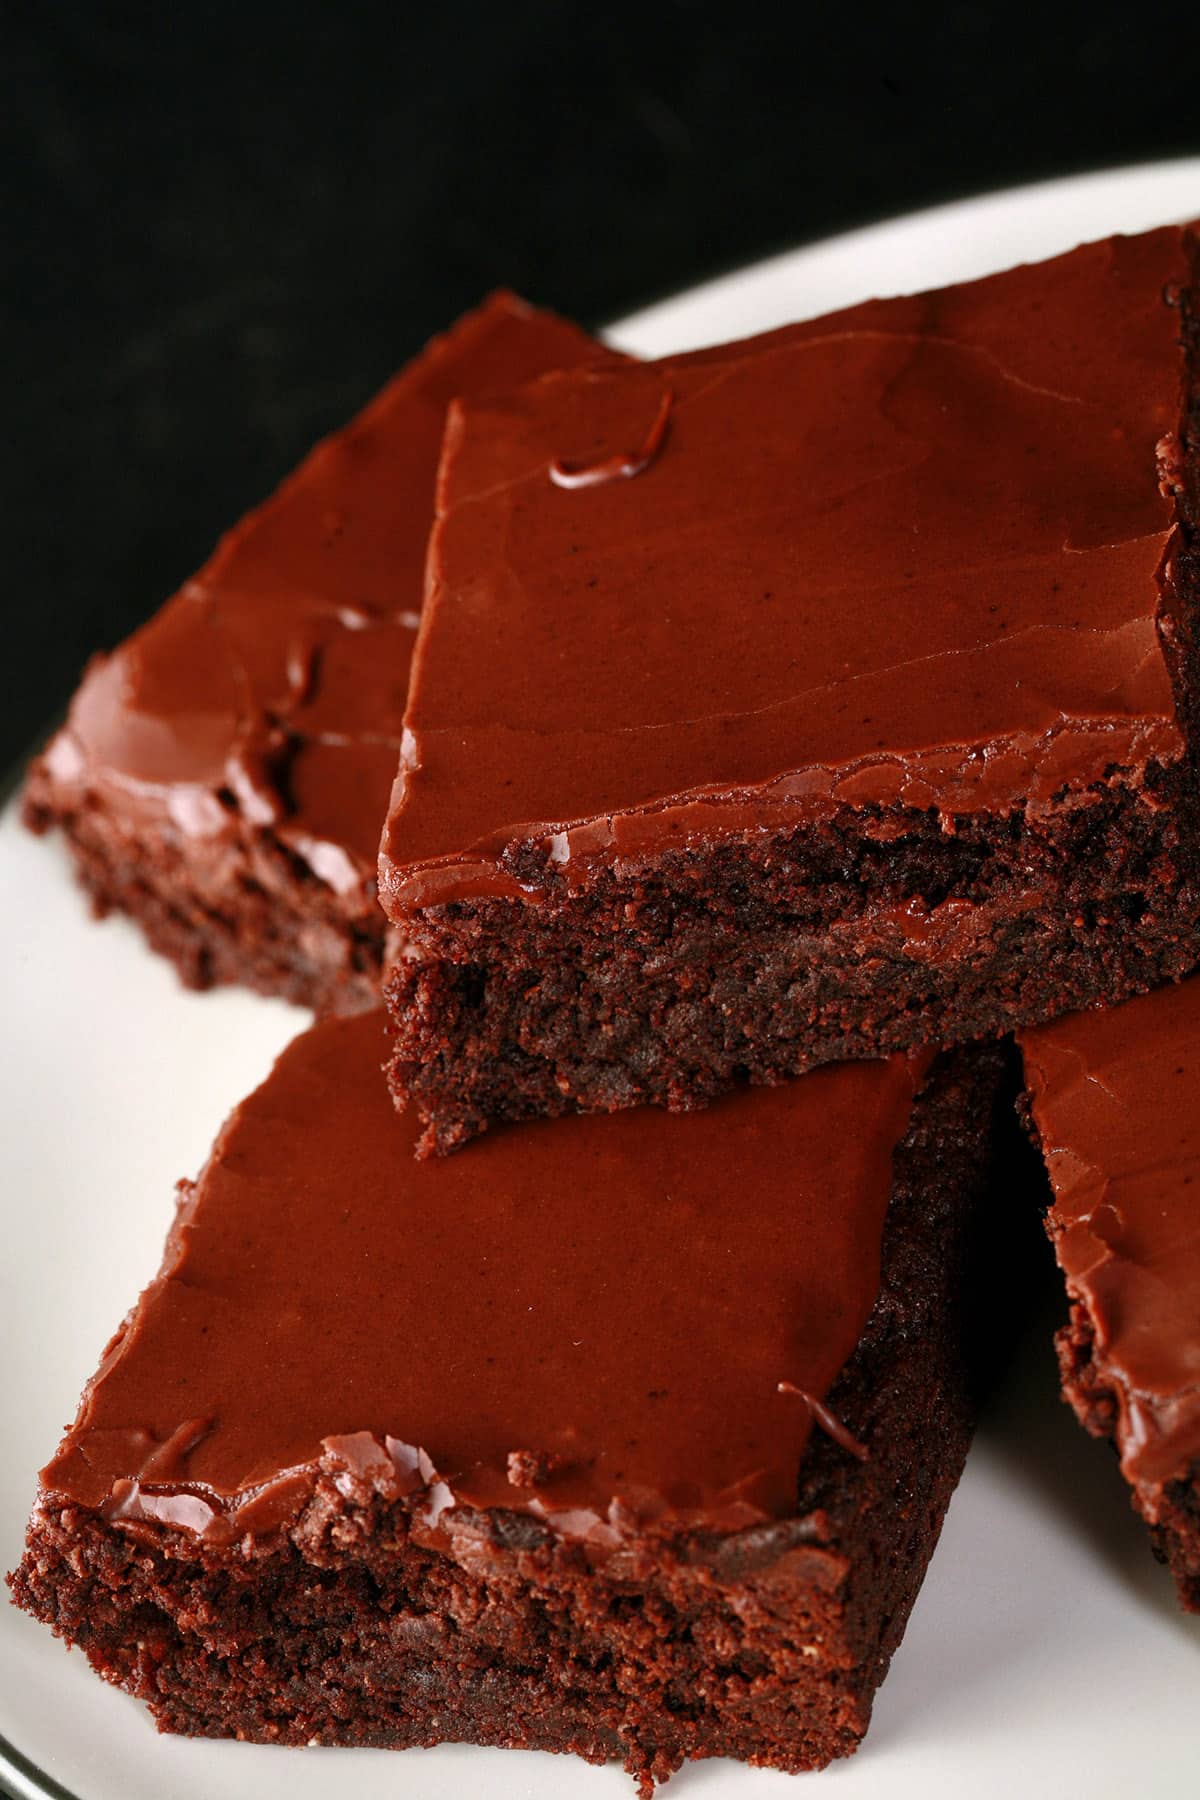 A plate of gluten-free brownies with chocolate glaze.